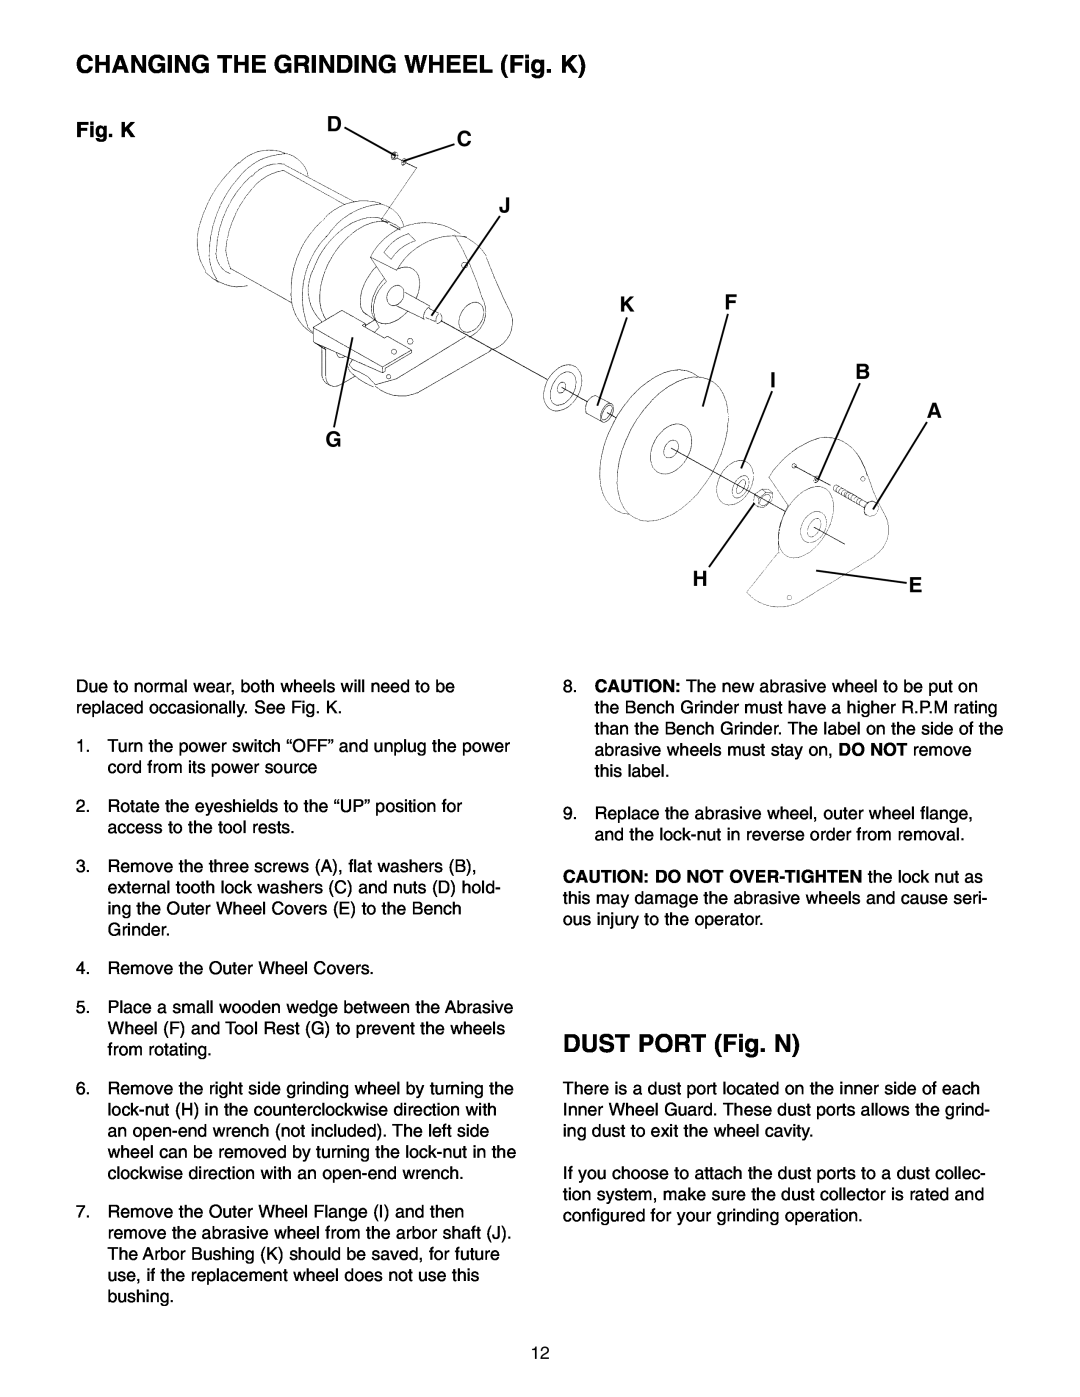 Craftsman 152.22018 owner manual CHANGING THE GRINDING WHEEL Fig. K, DUST PORT Fig. N, J K F I B A G H E 